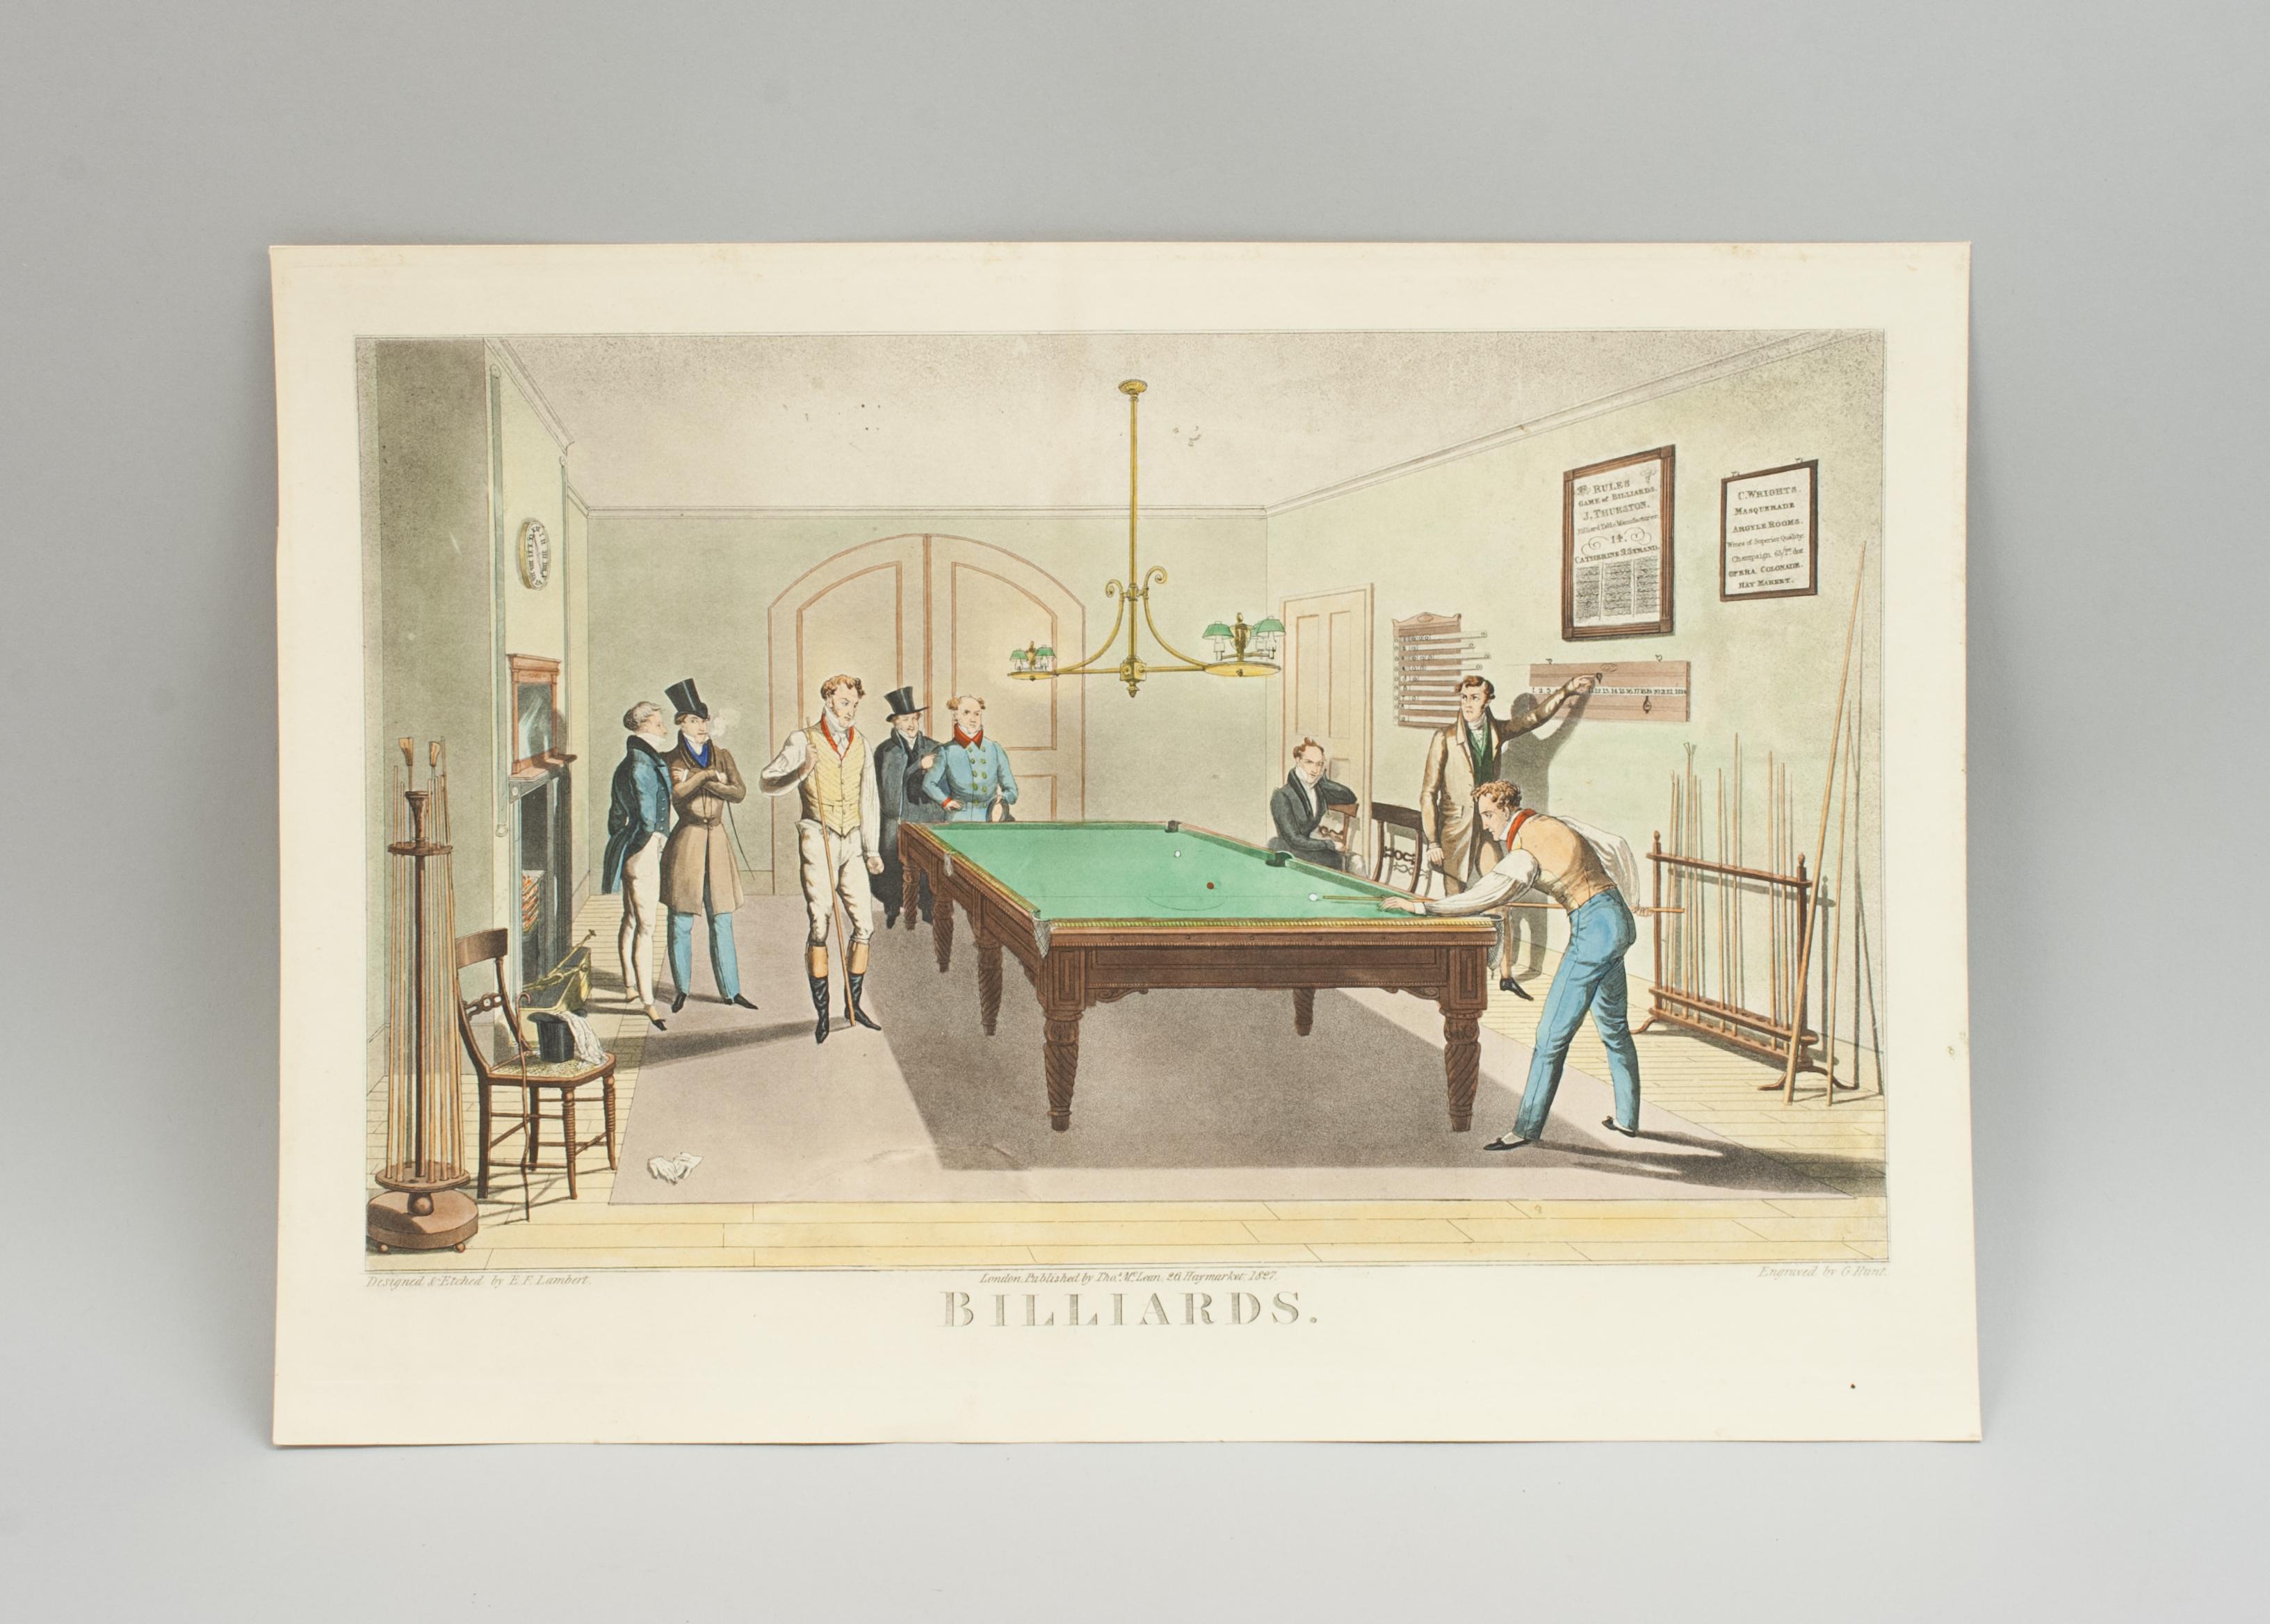 E.F Lambert Billiards Engraving.
An unframed, hand coloured lithograph, 20th century reproduction print taken from the original plate designed and etched by E.F. Lambert. The picture depicts a group of men in the throws of a billiard match. Two